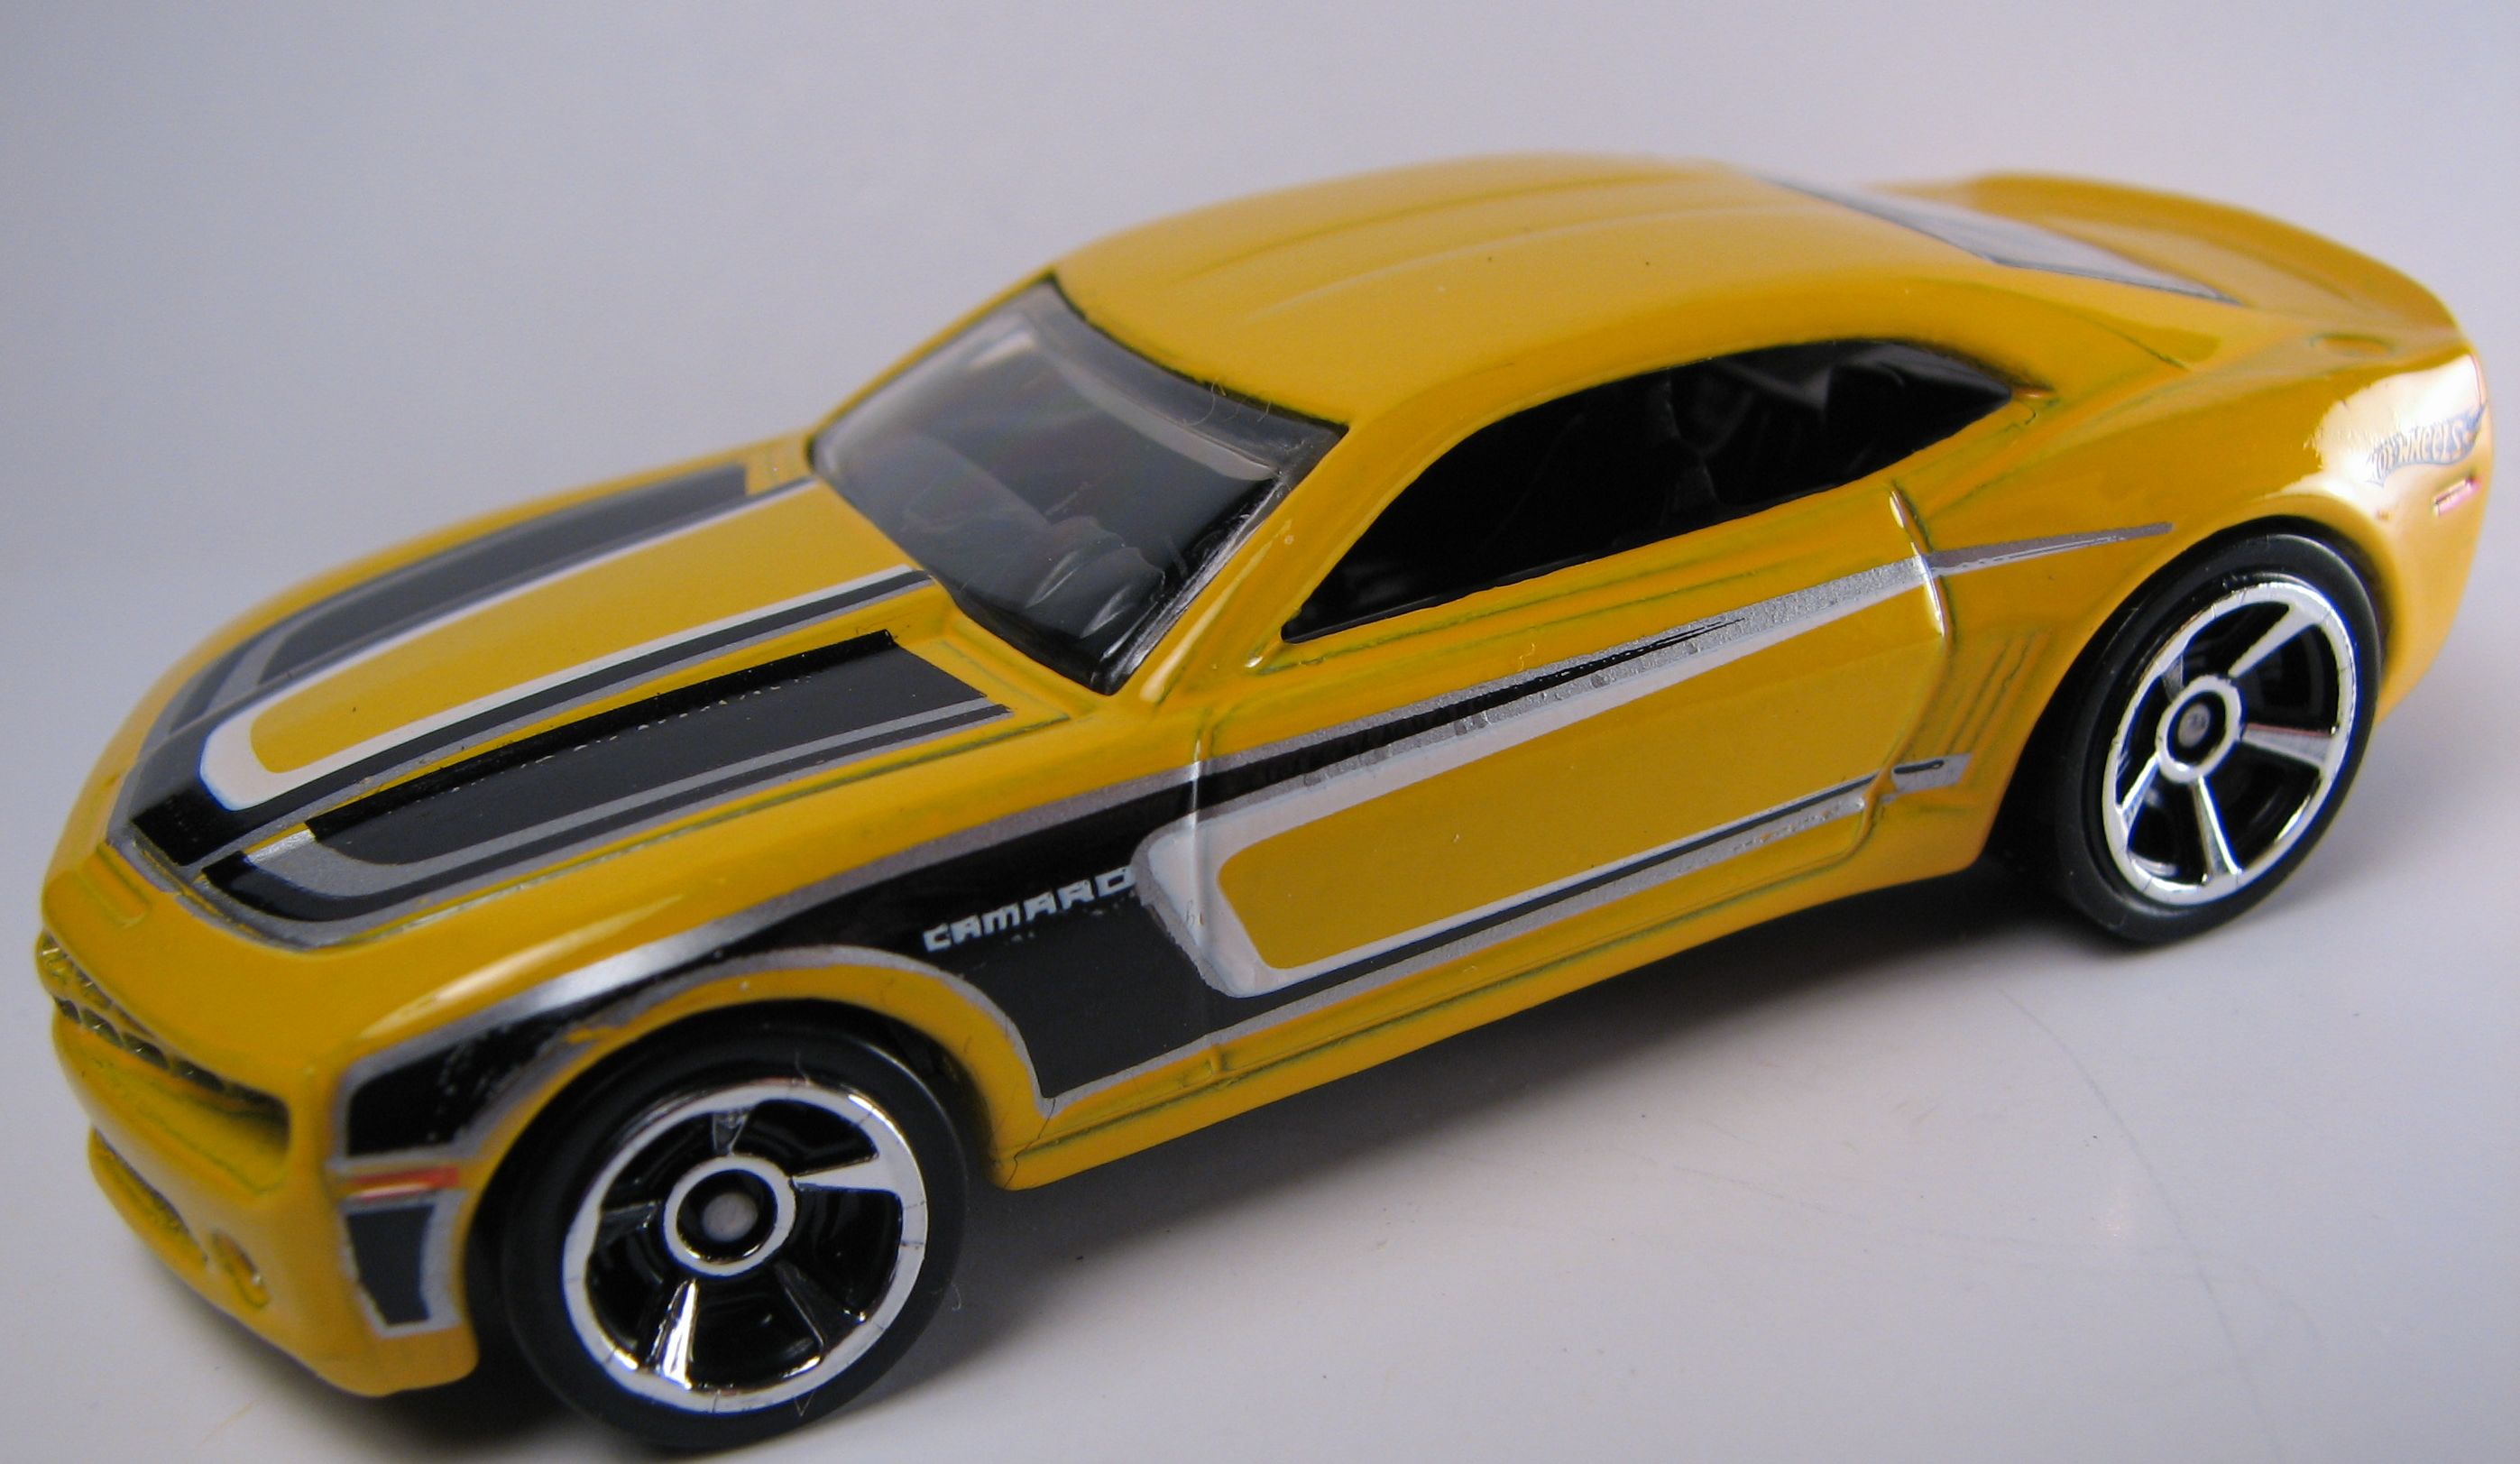 You Select Details about LOOSE 2011 Hot Wheels Nightburnerz Segment.